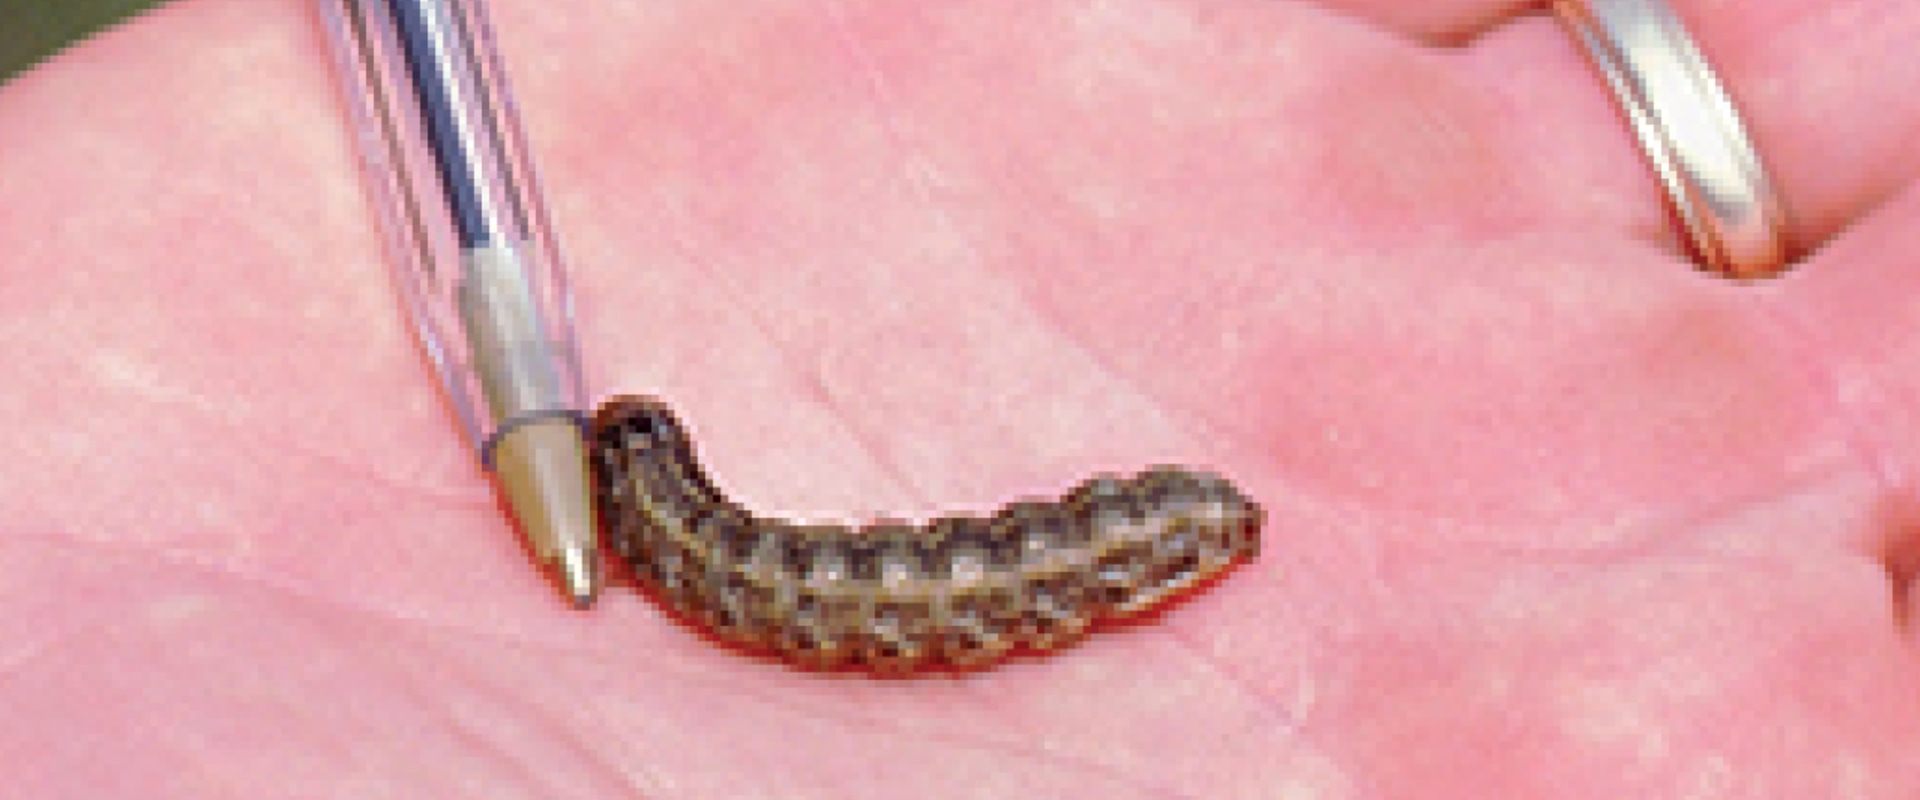 Does lawn insecticide kill worms?